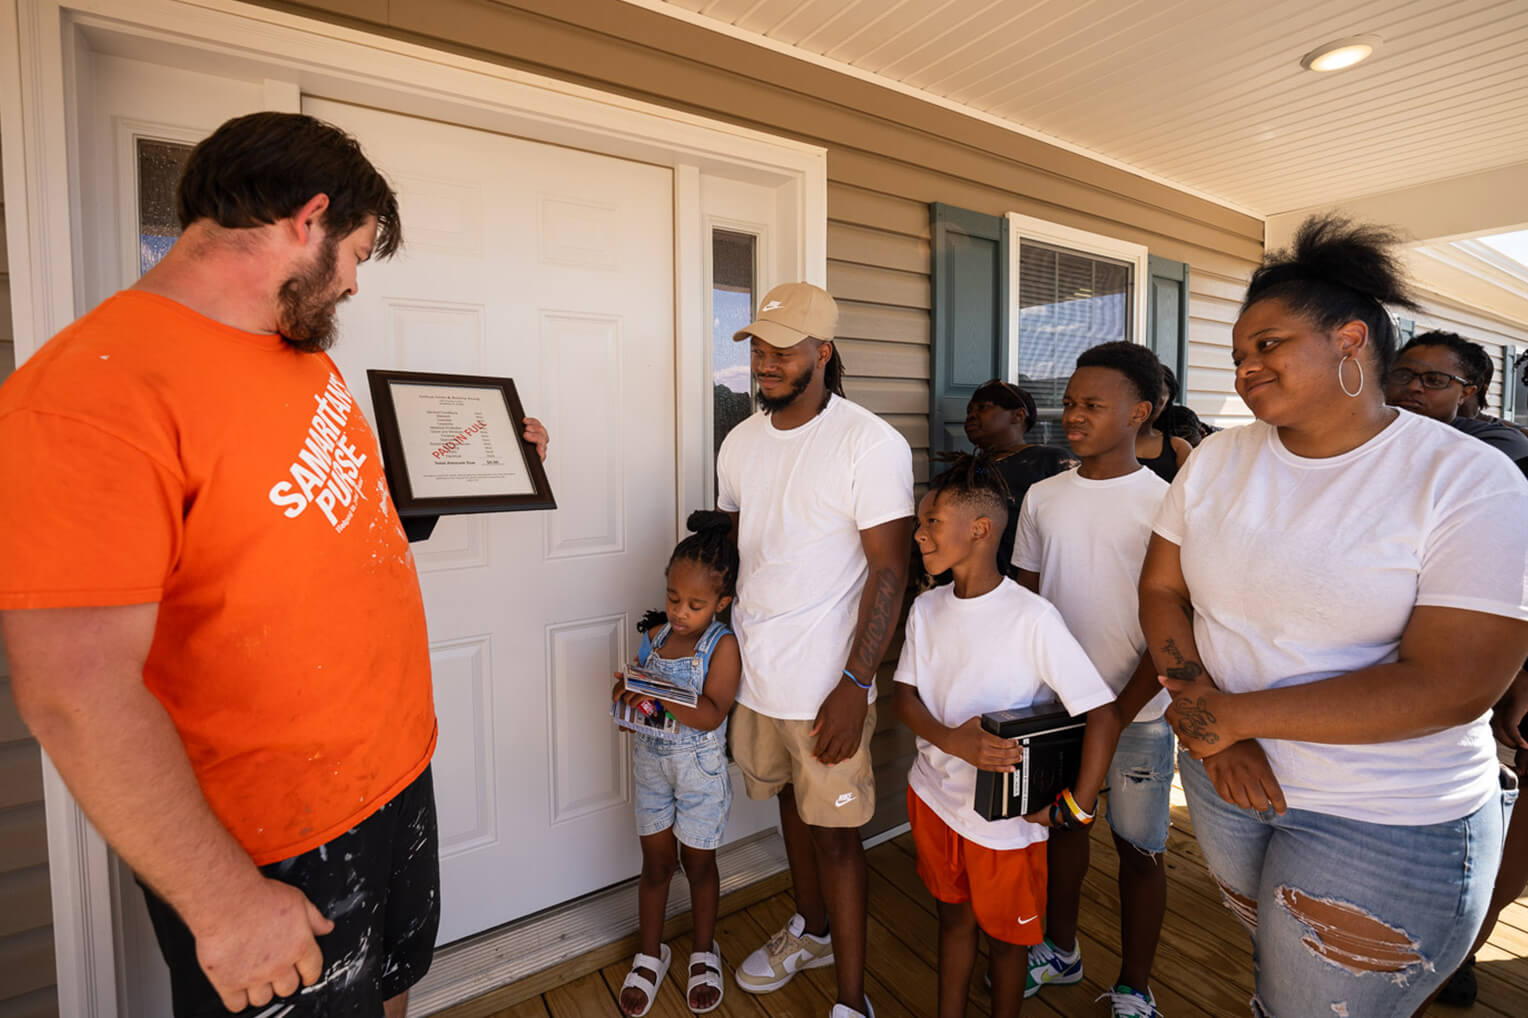 Josh's home was among the hundreds of buildings to be leveled in Mayfield by the EF4 tornado. Now, he and his family enter a new home provided by Samaritan's Purse free of charge. 